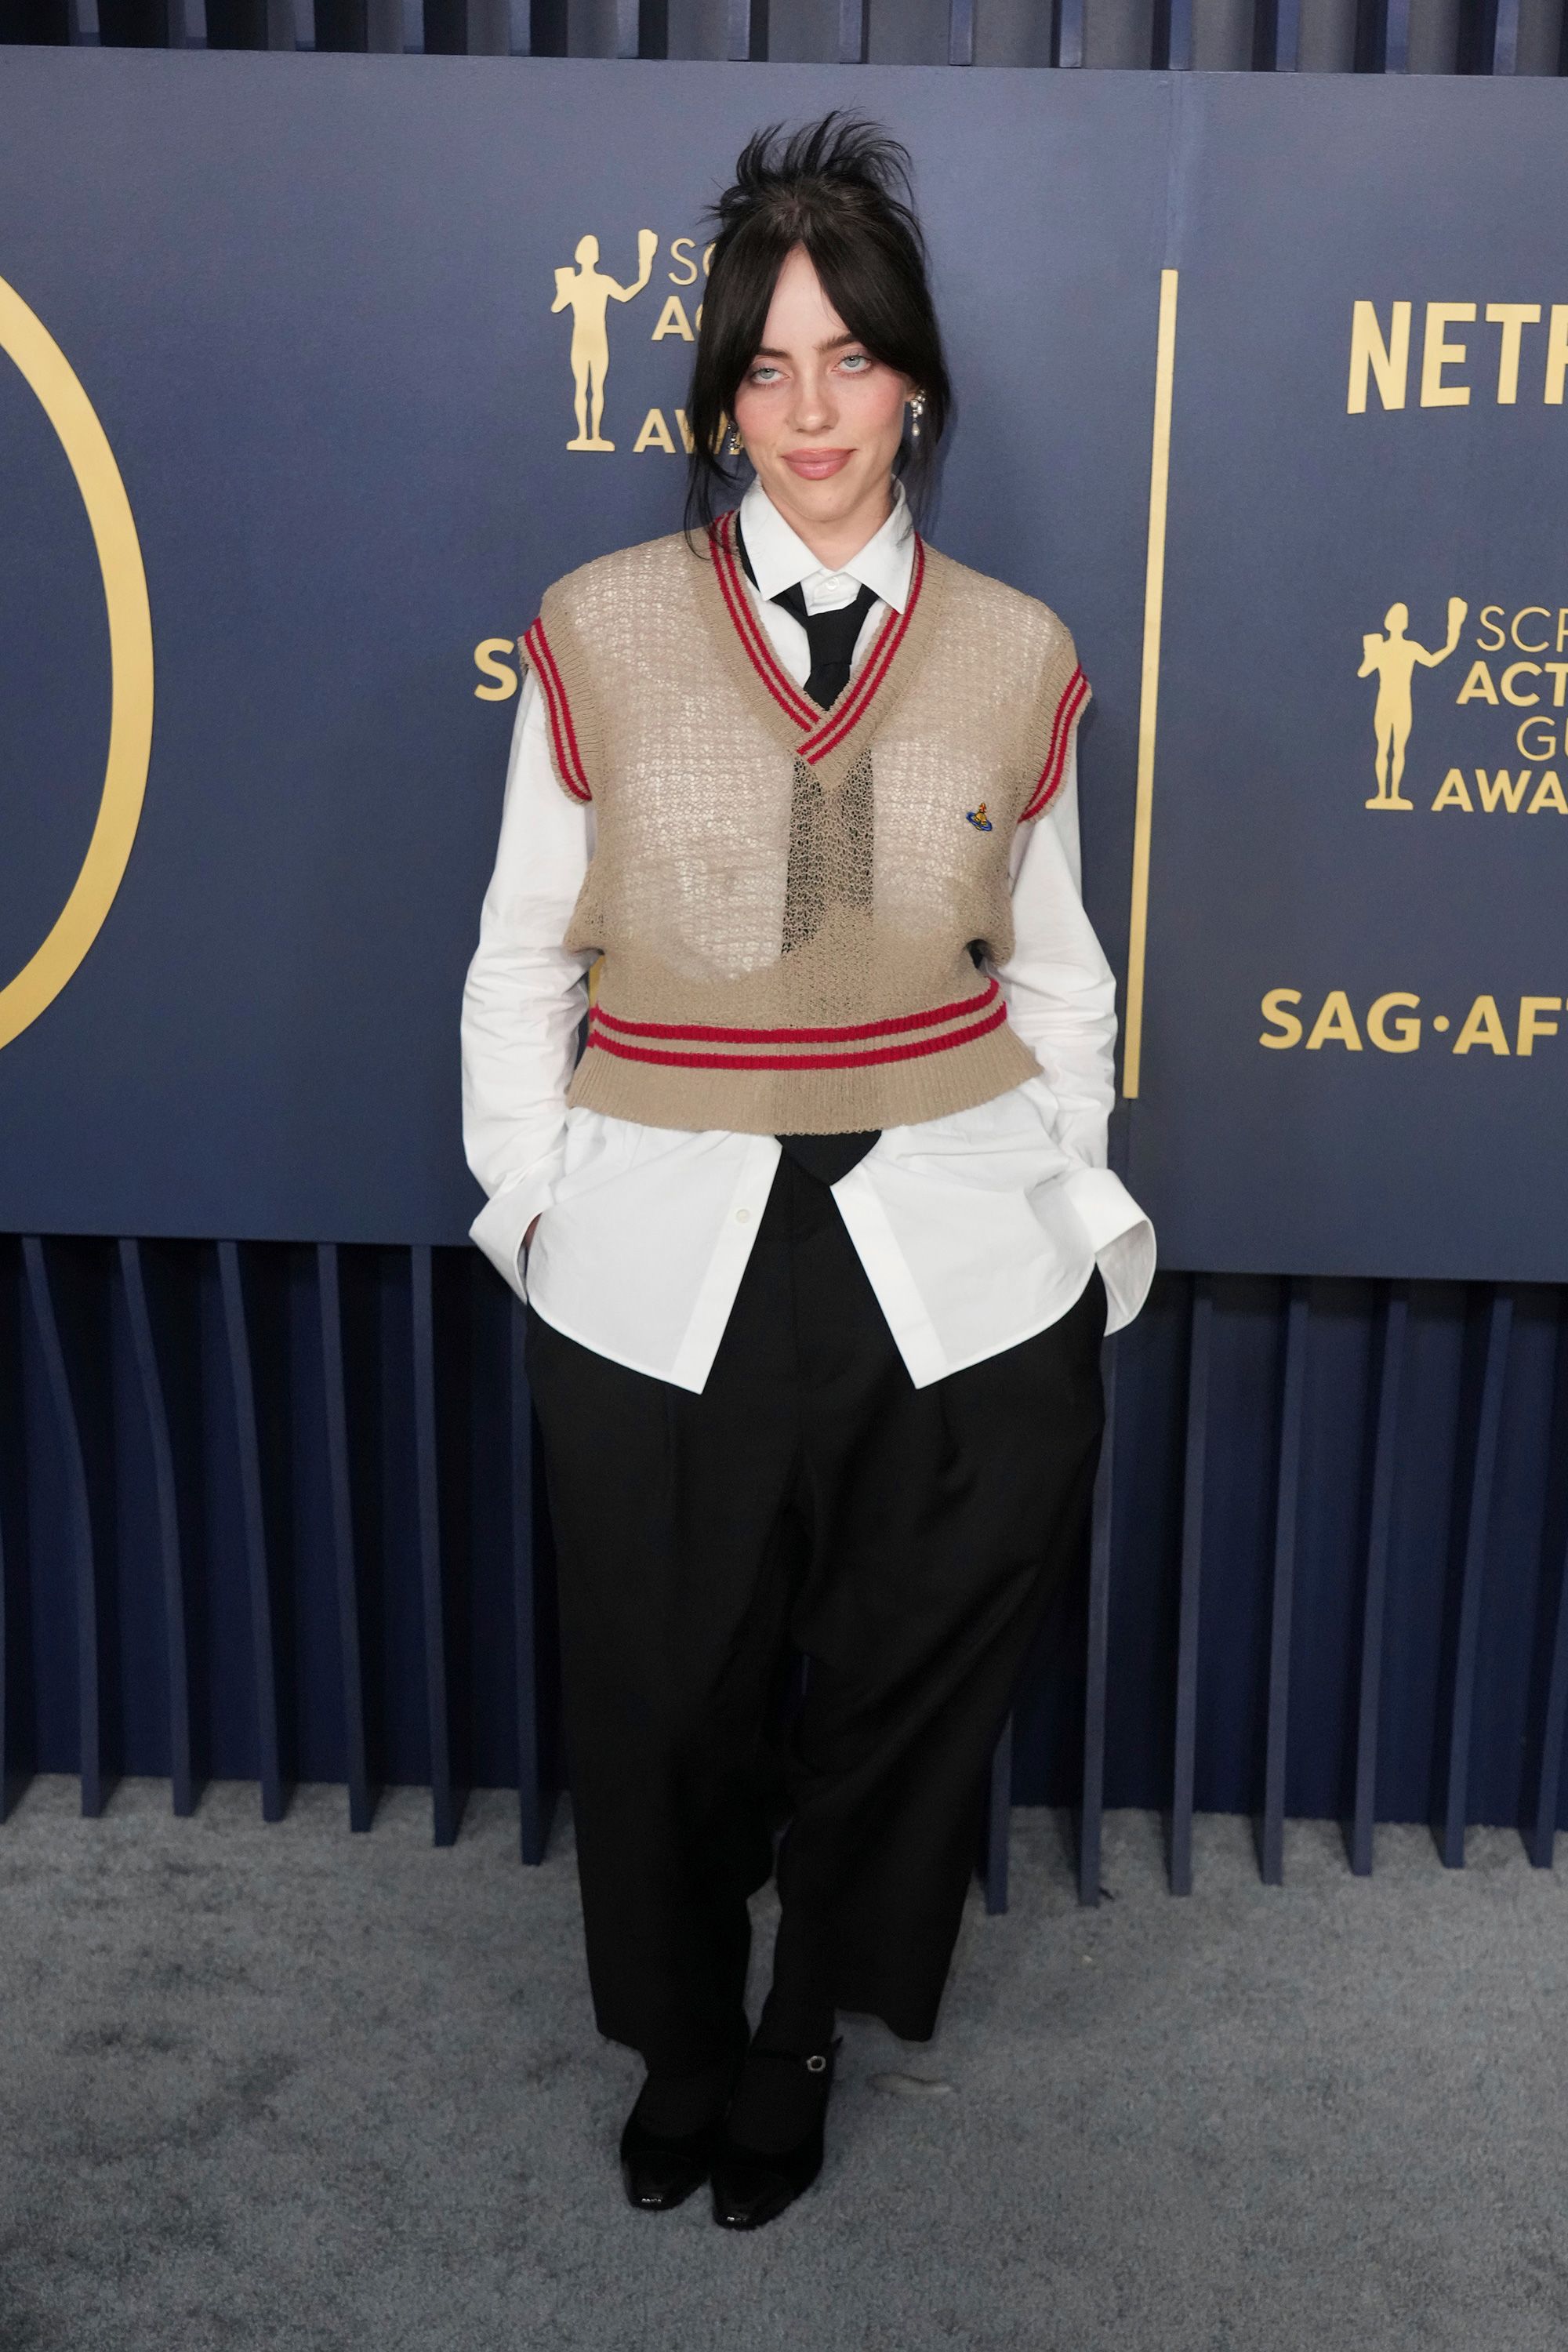 Billie Eilish in a Vivienne Westwood knit and loose suiting.